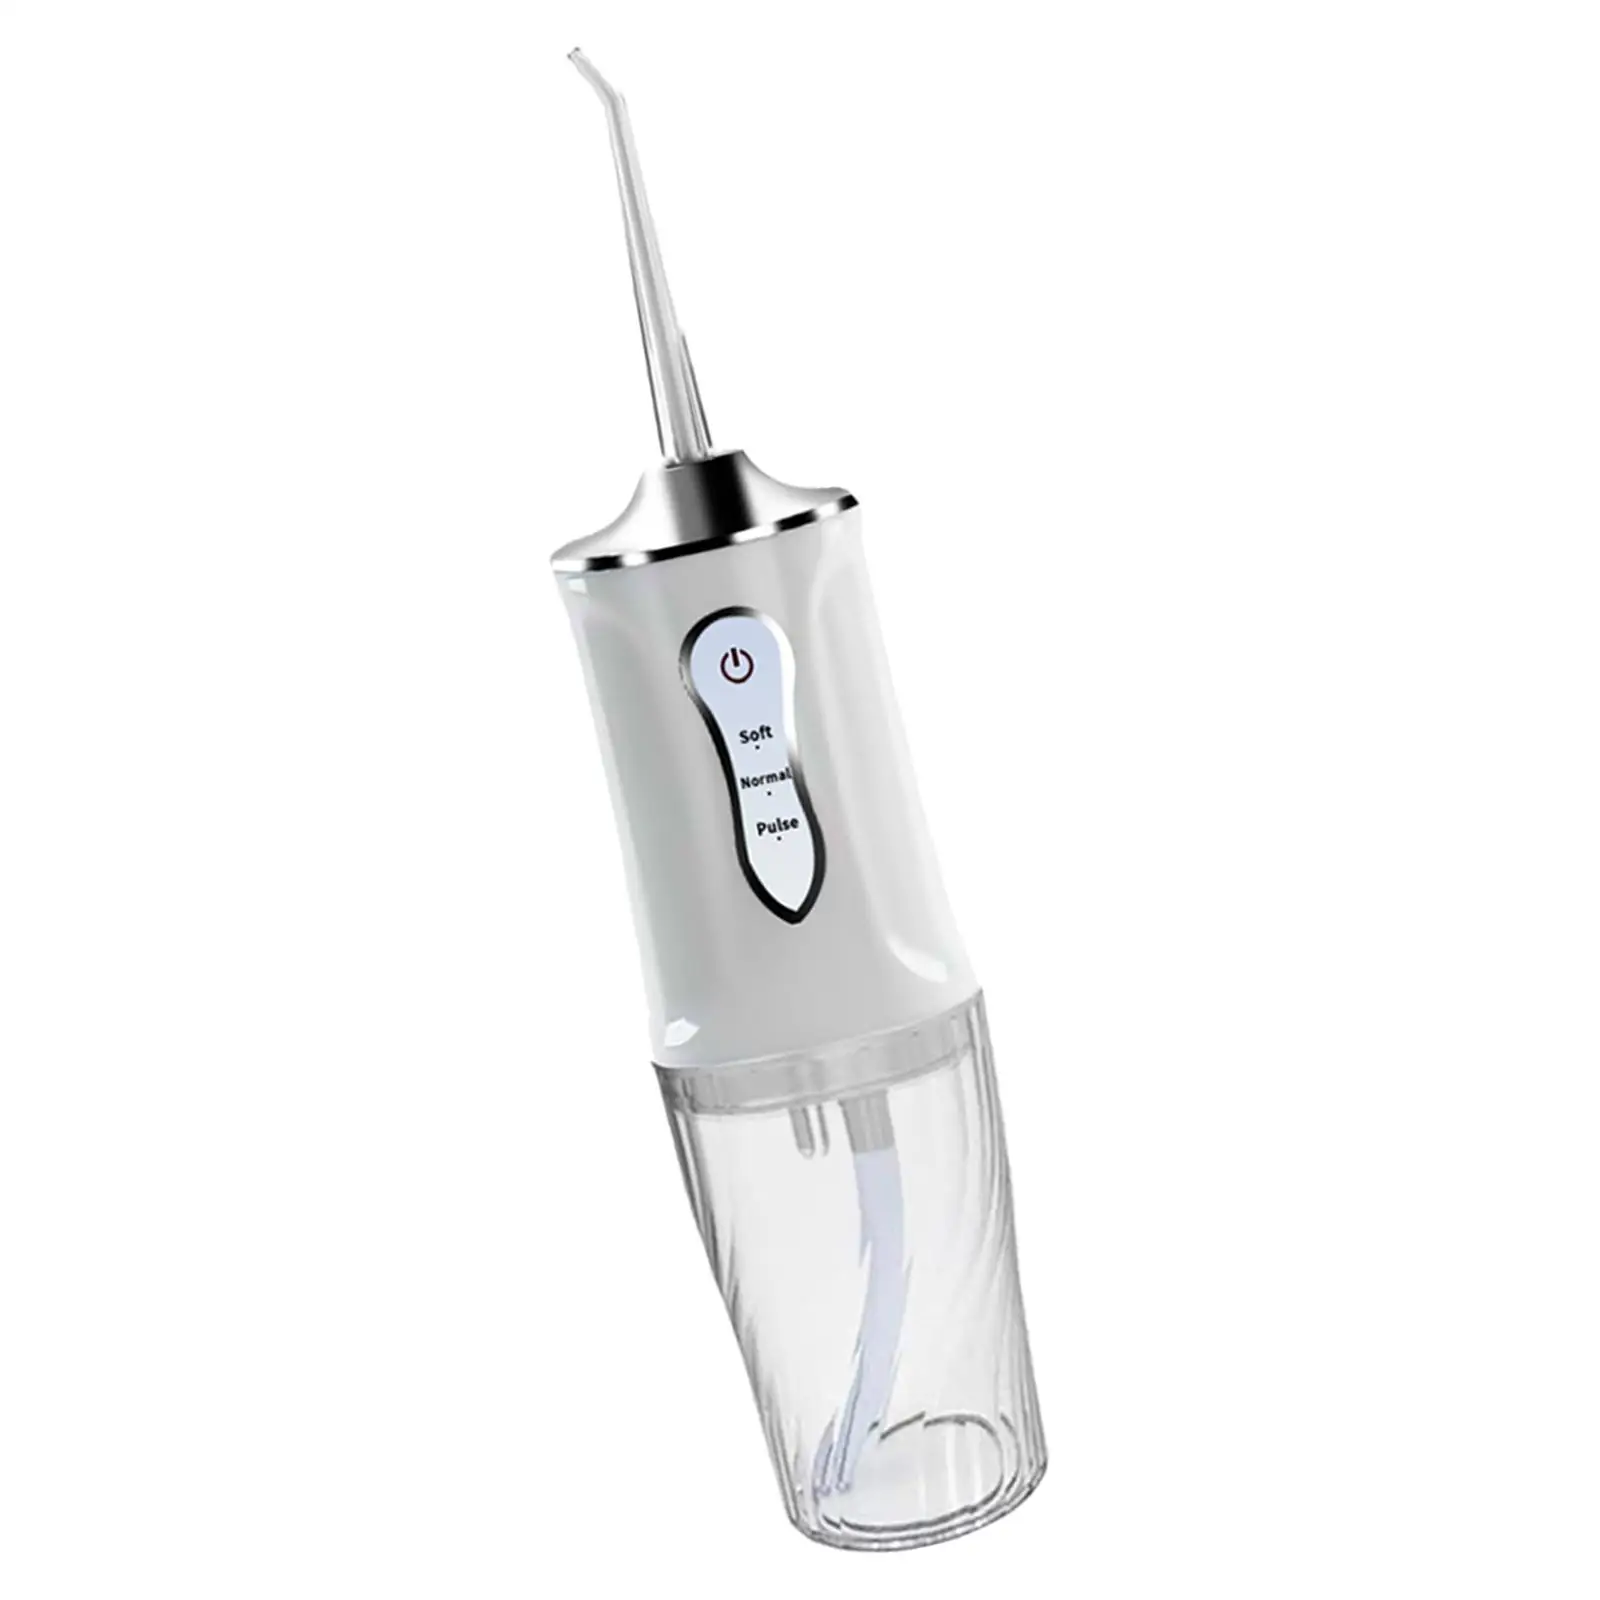 Oral Irrigator Cordless Flossing Nozzles for Care Gums